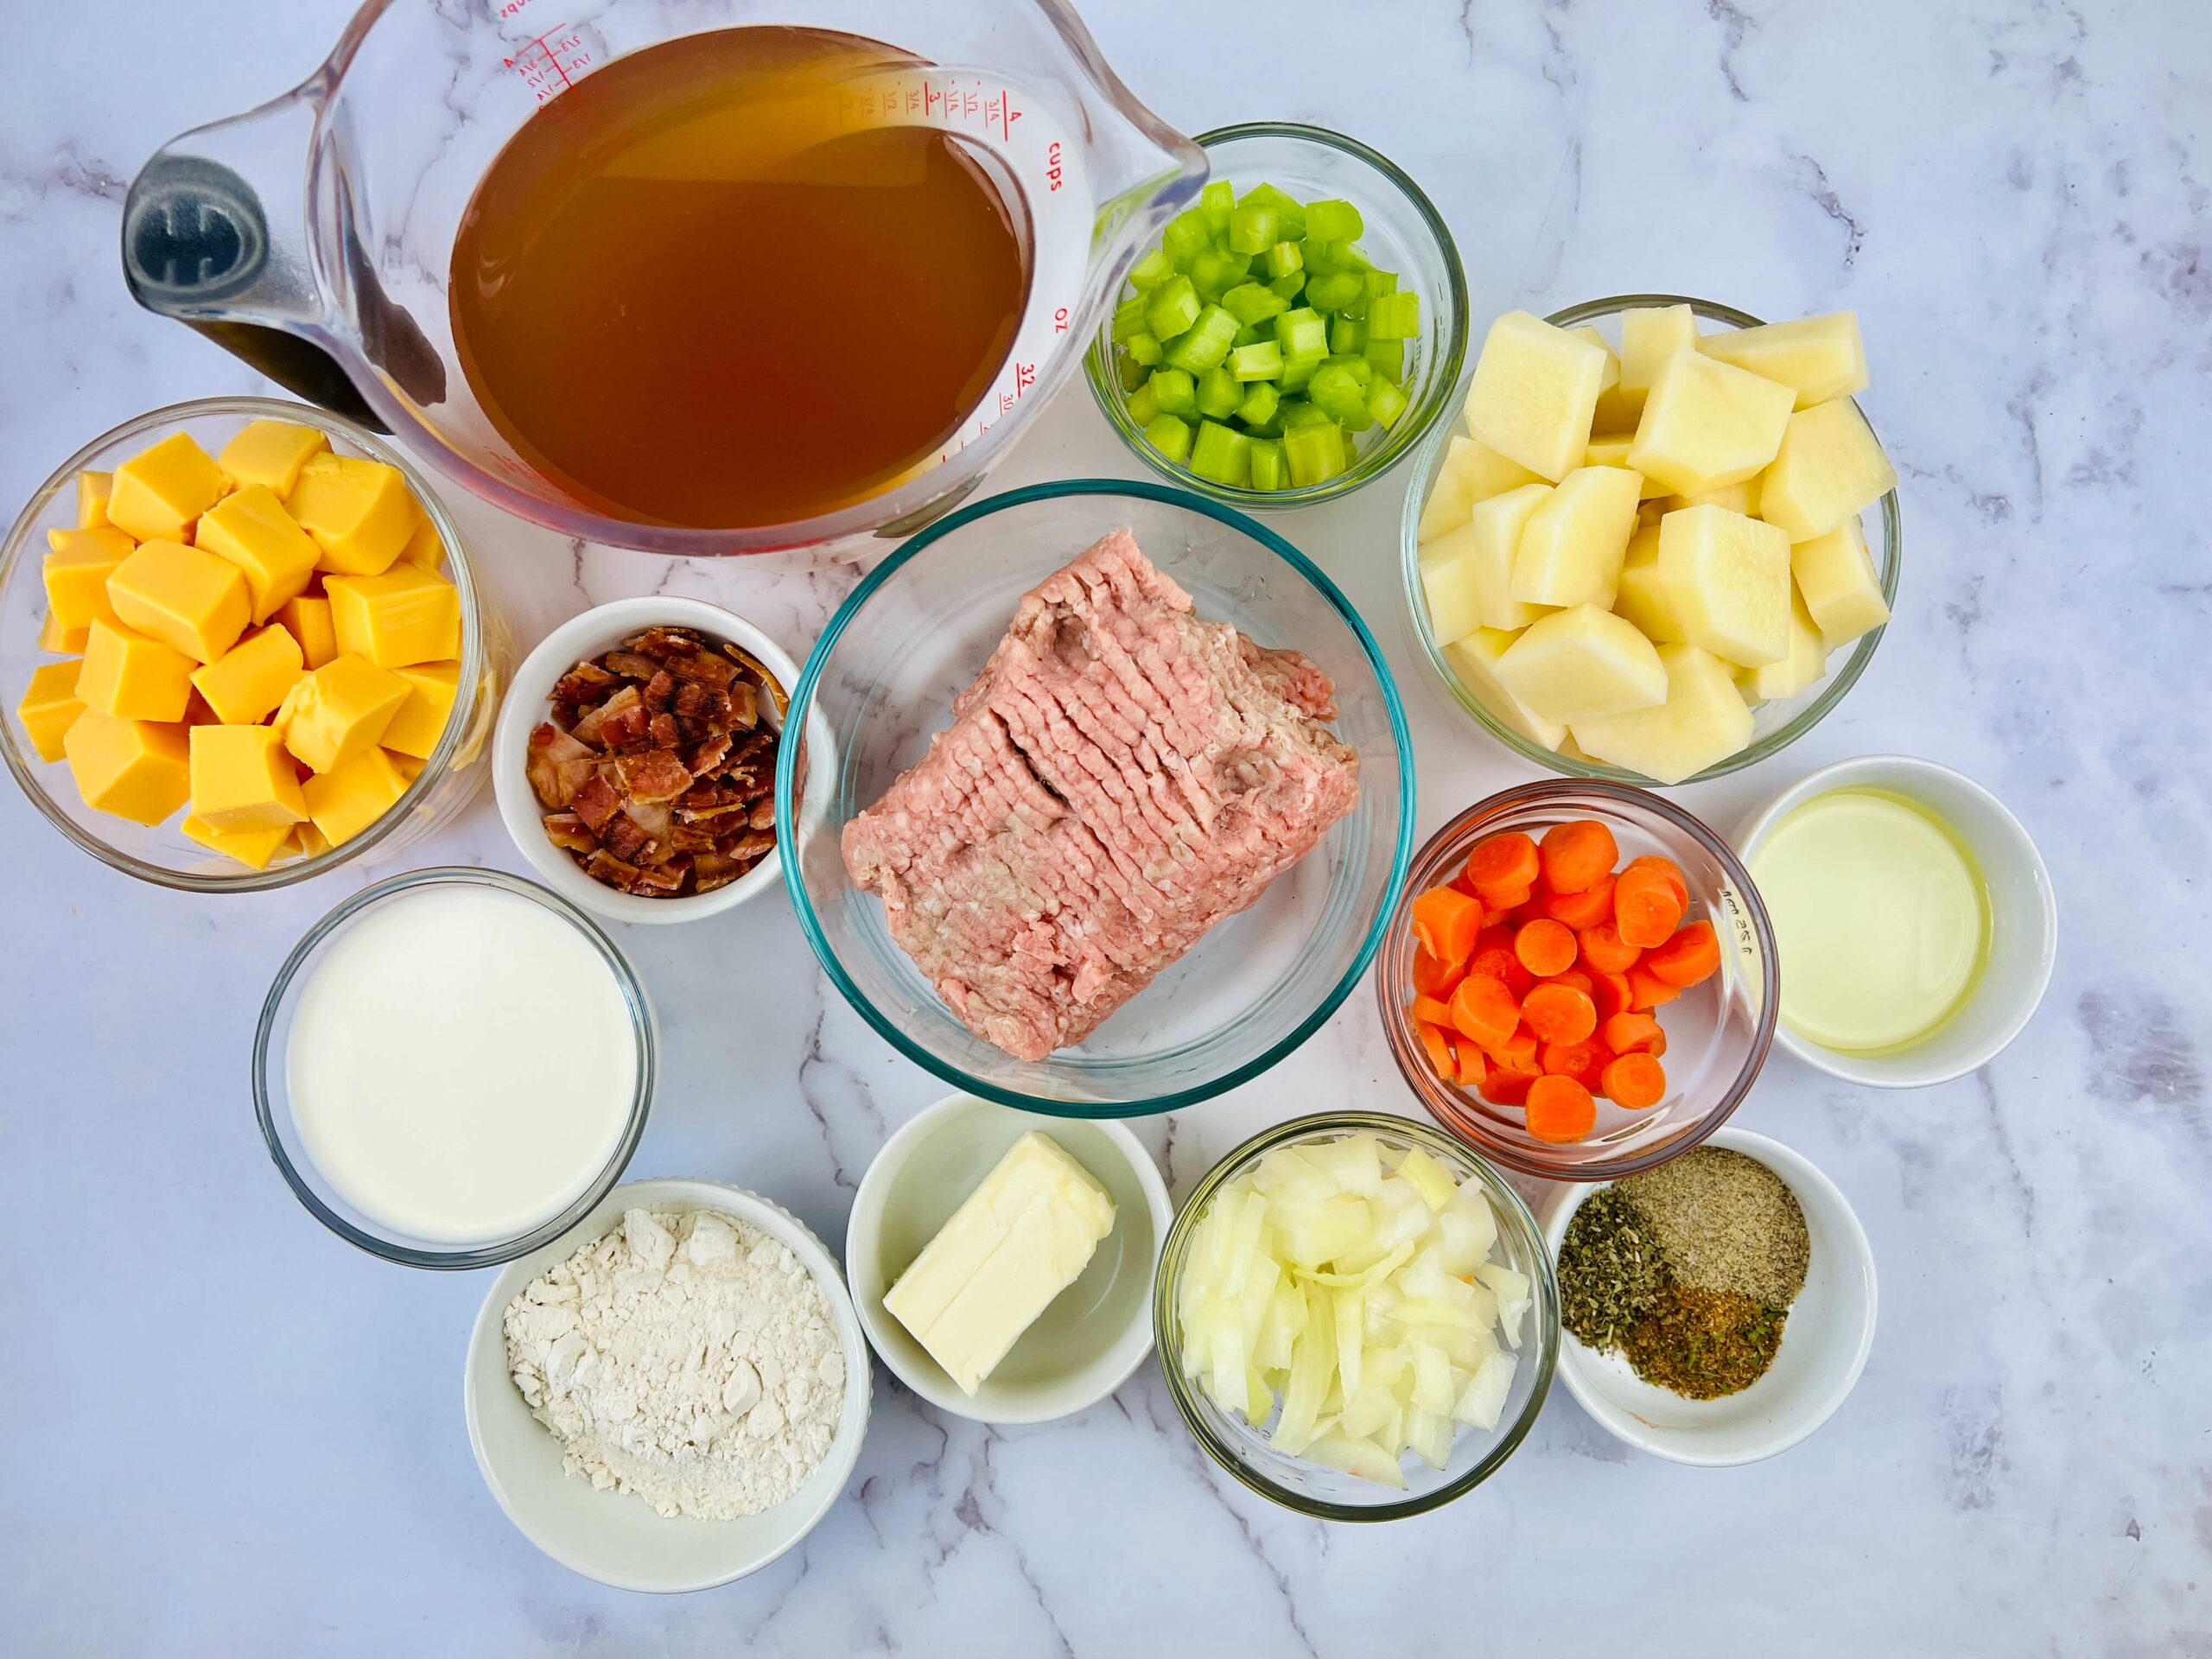 The ingredients for a savory soup. Ground beef, vegetables, broth and seasonings.